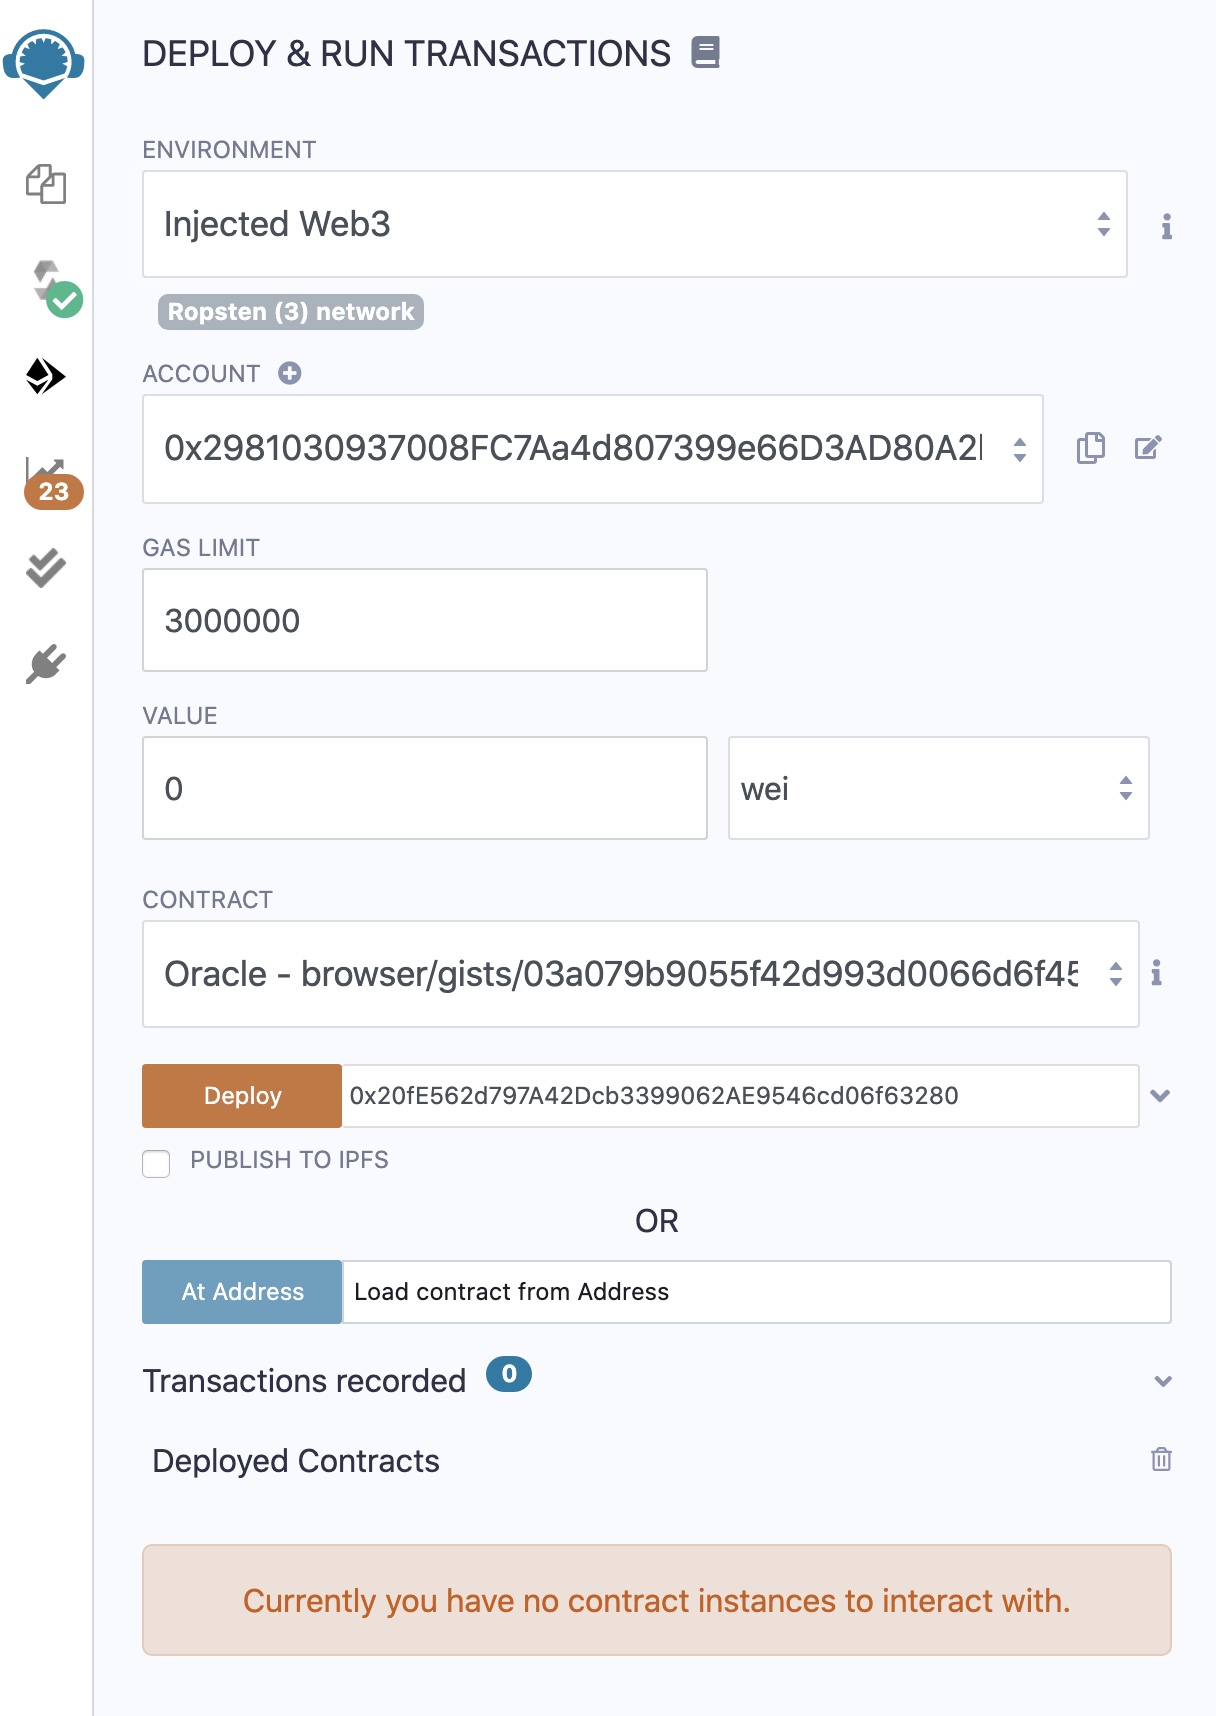 The Deploy & Run transaction window showing Injected Web 3 selected and the address for your MetaMask wallet.